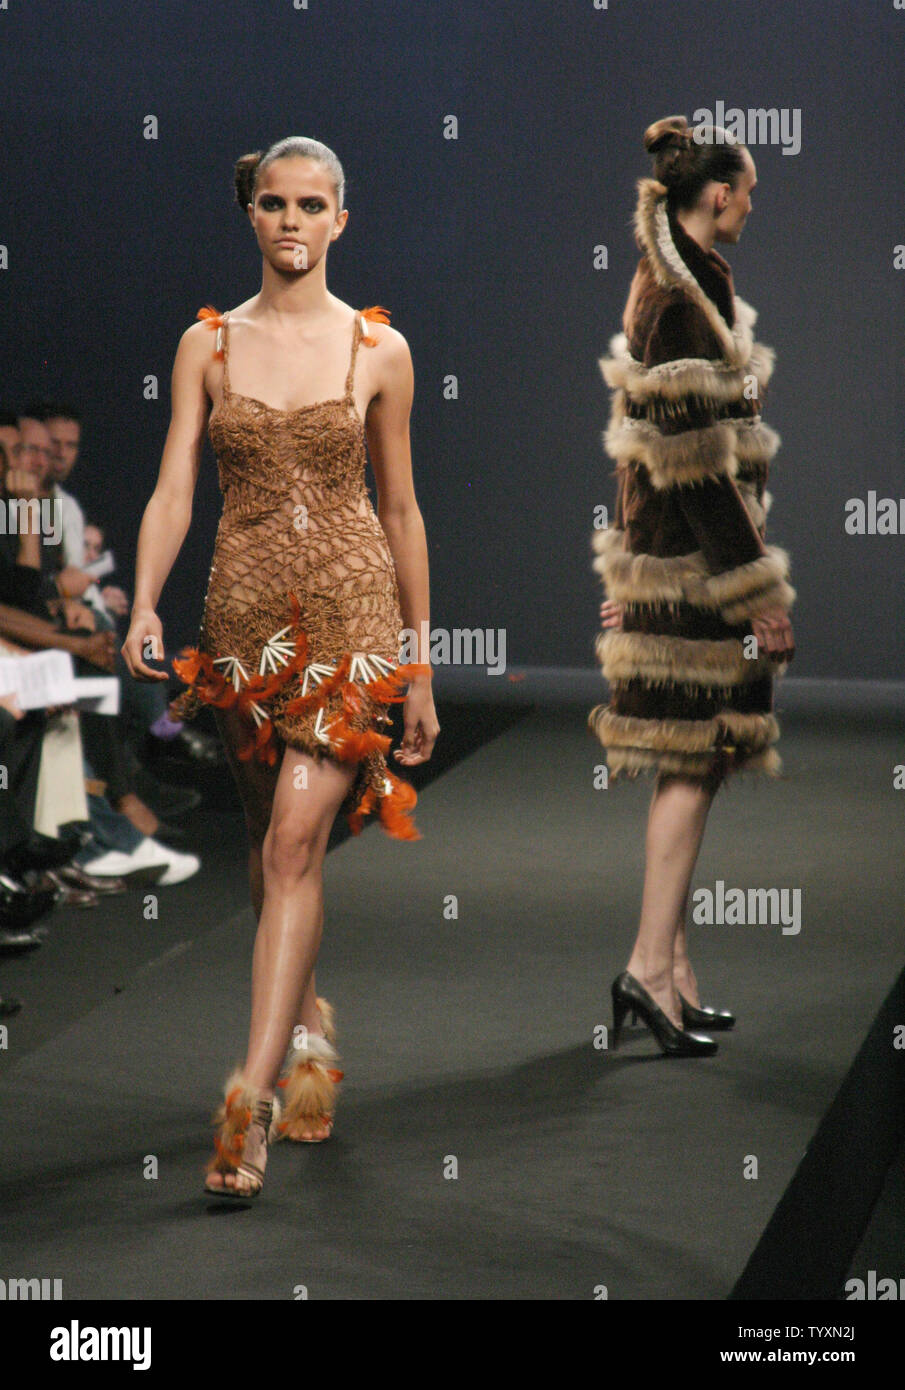 A model presents a new creation from designer Adam Jones during a fashion  show at the Intercontinental Hotel in Paris, France on July 6, 2005. The  show was part of the Autumn/Winter